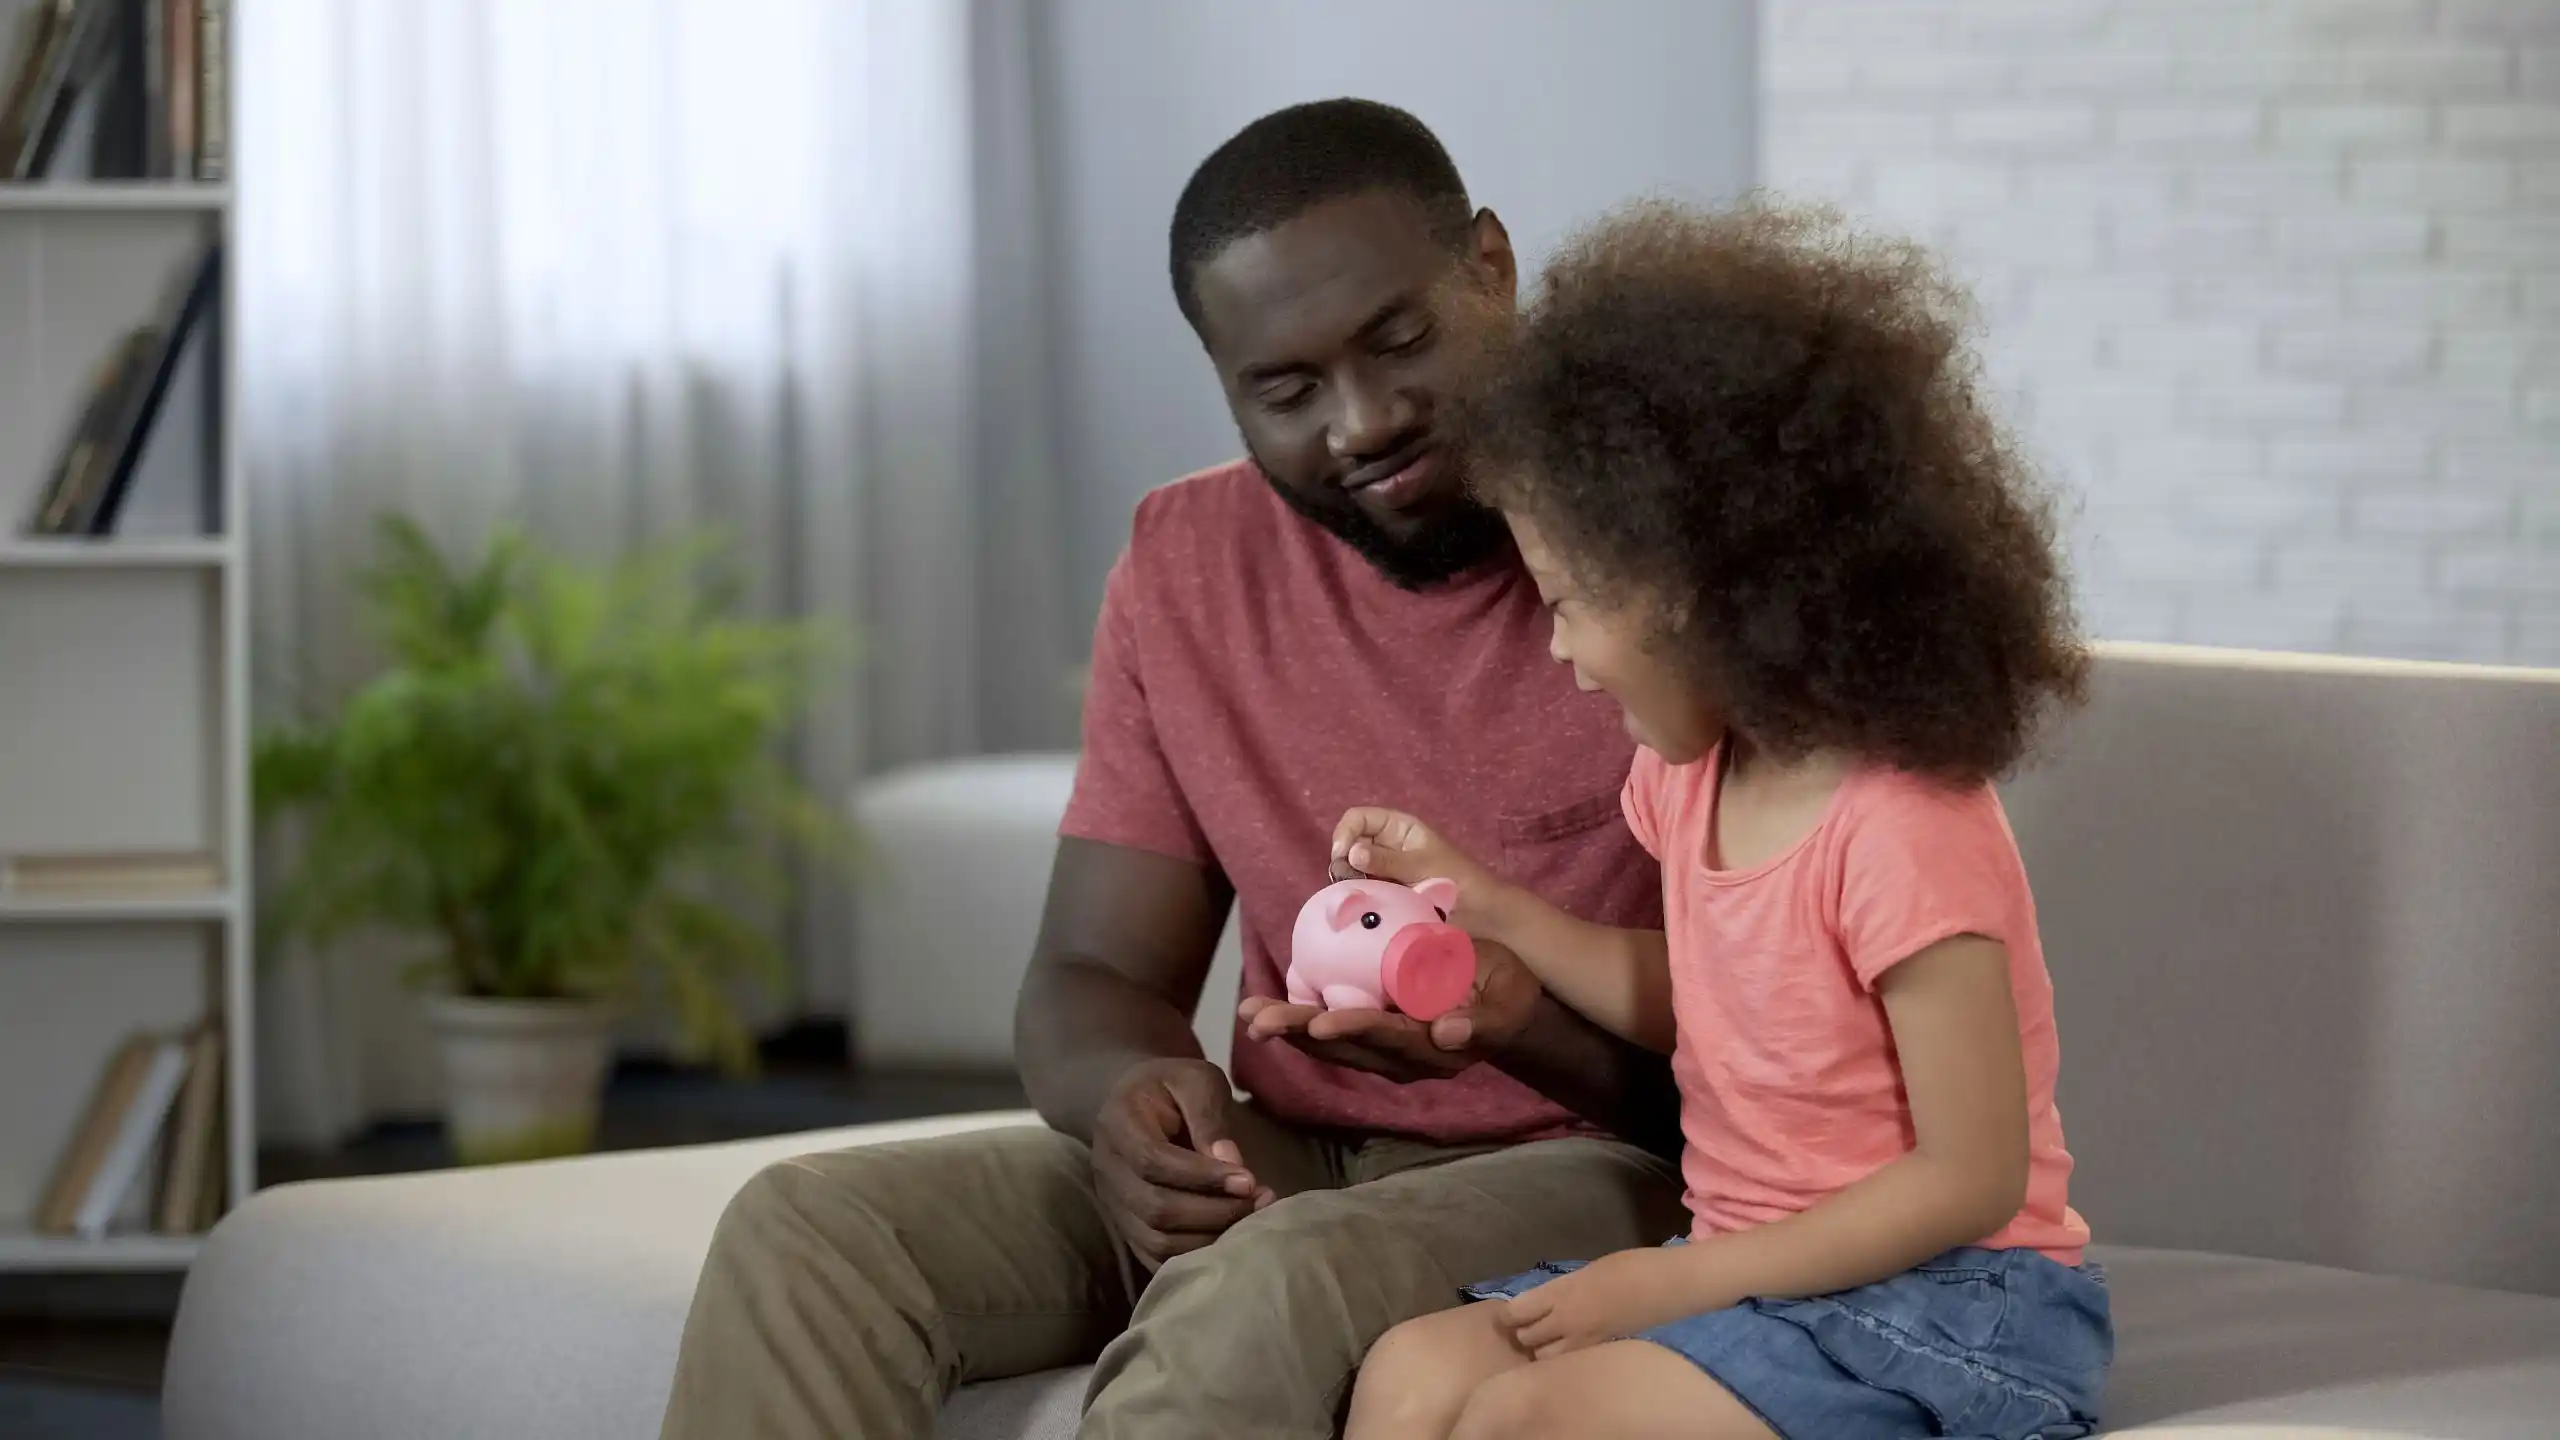 Child Putting Money into Piggy Bank Father is Holding